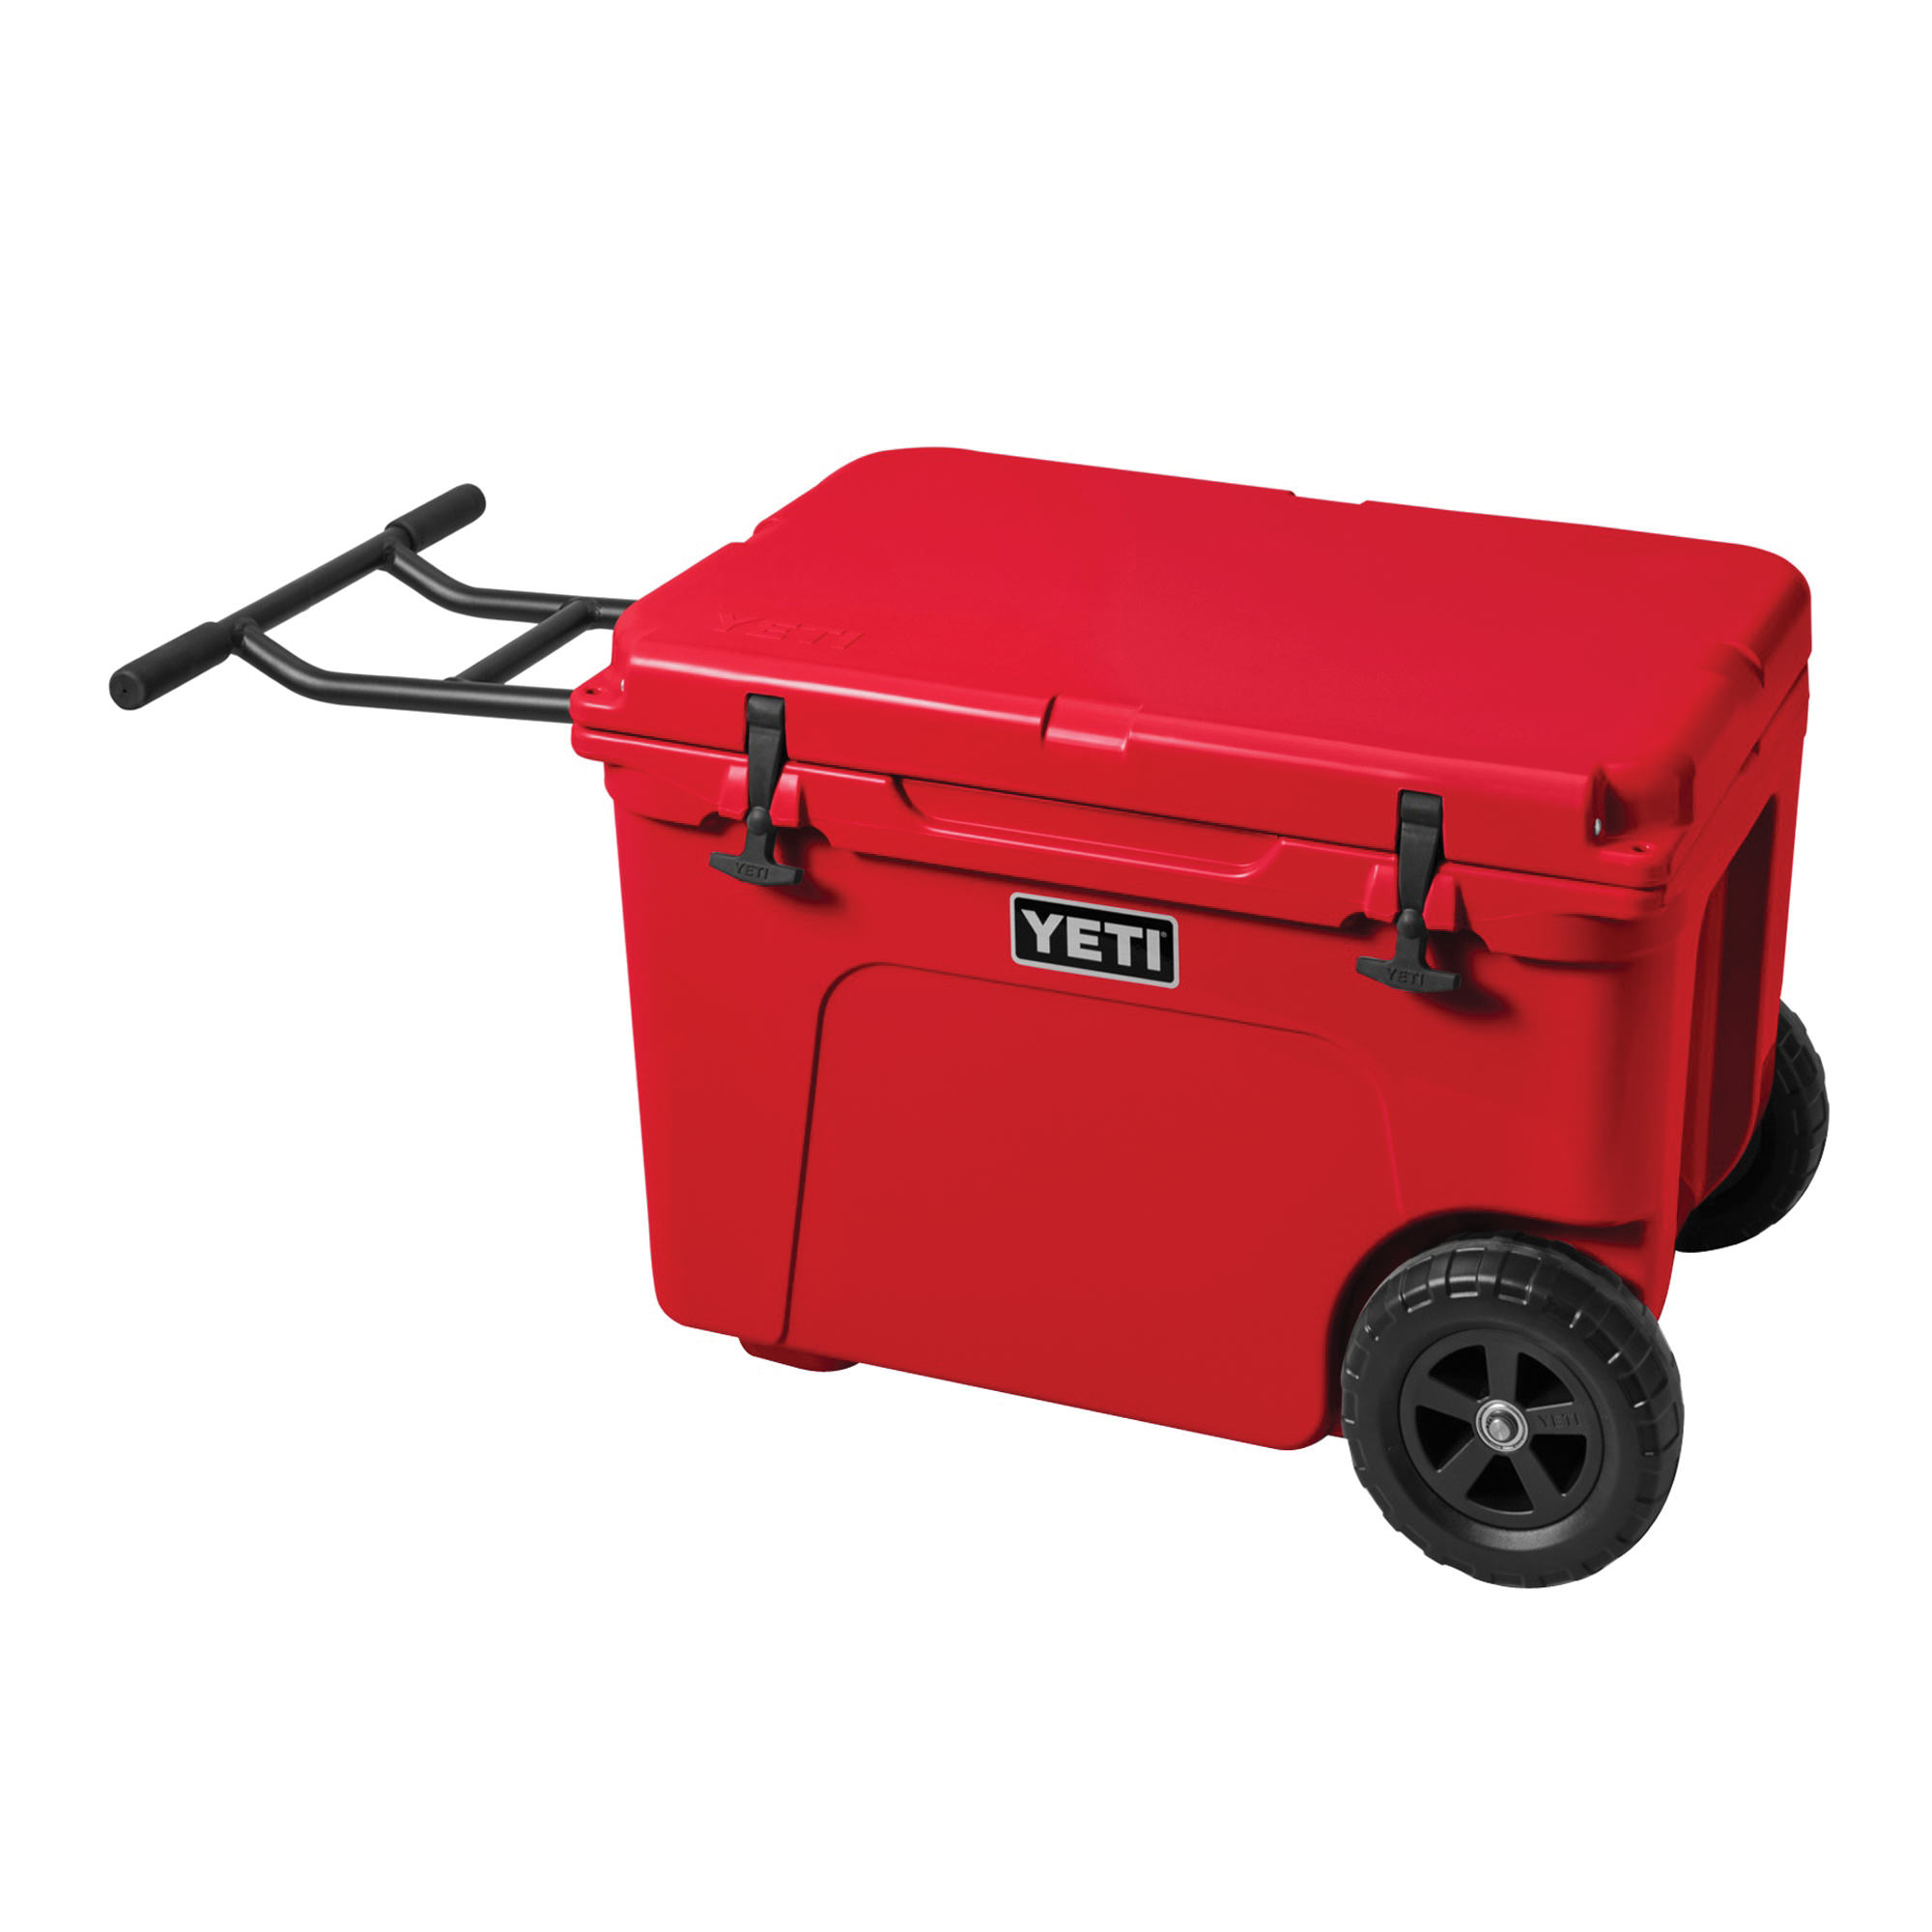 Yeti Tundra Haul 10060350000-RED Cooler, Haul Cooler, Res